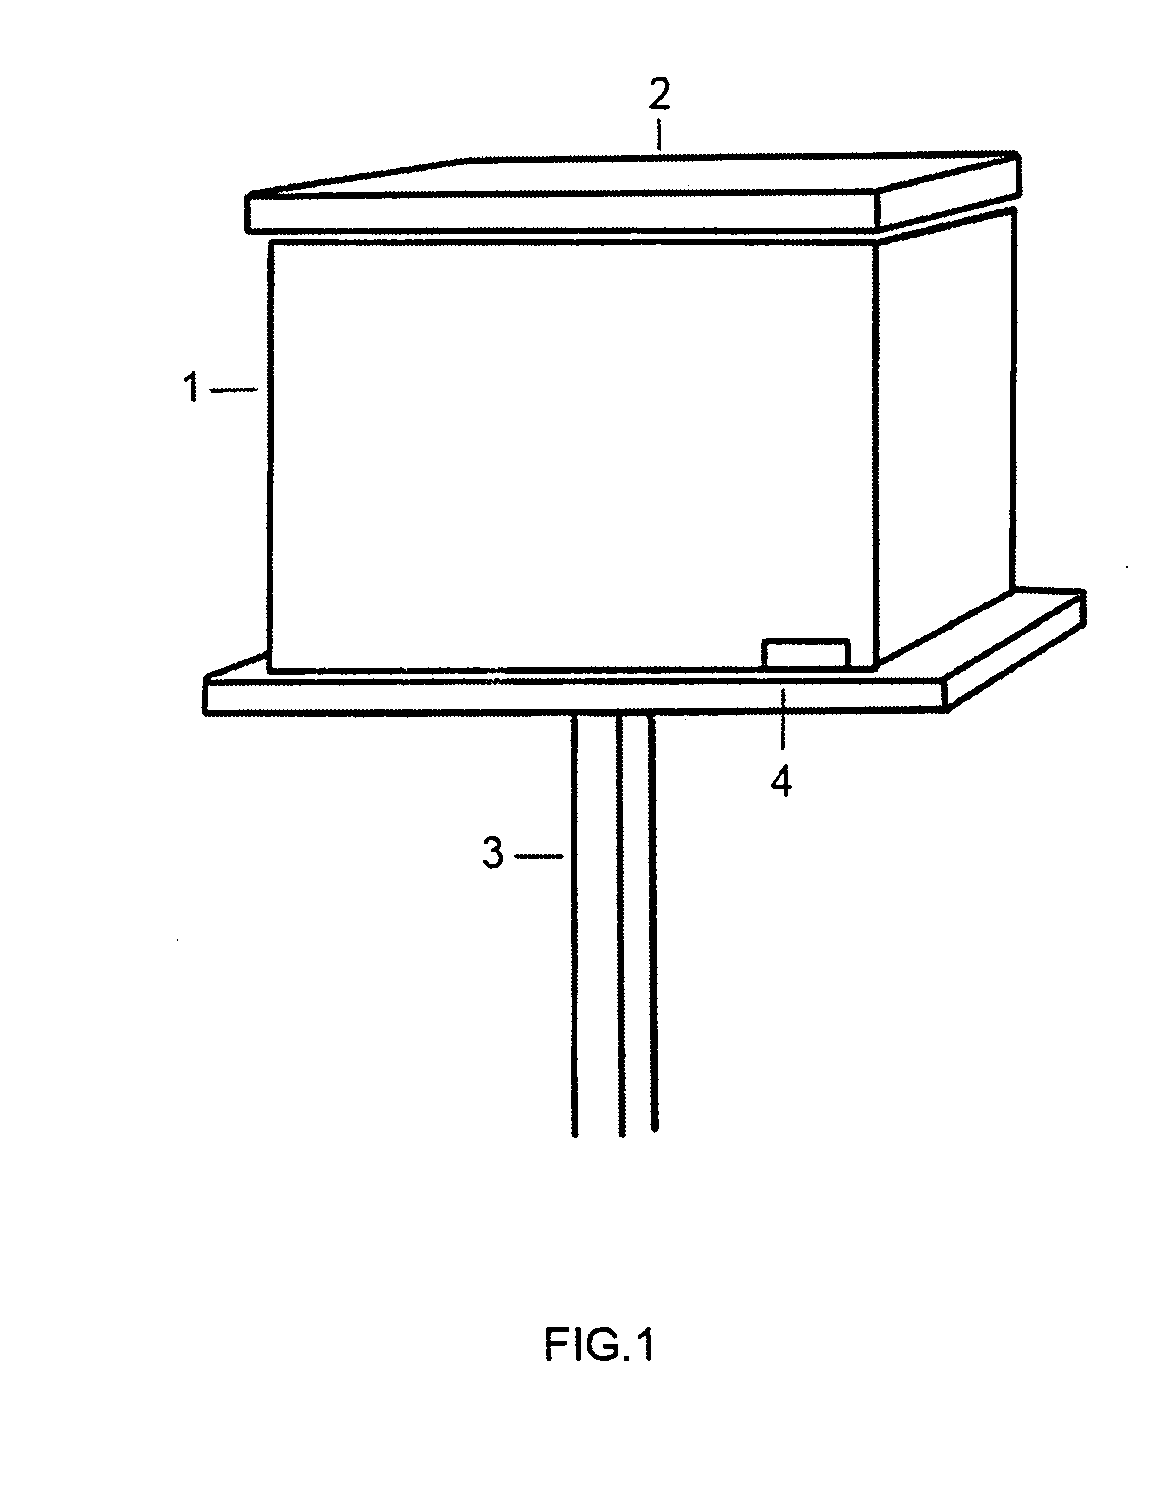 Device for hygienizing, warming, and dehumidifying a beehive